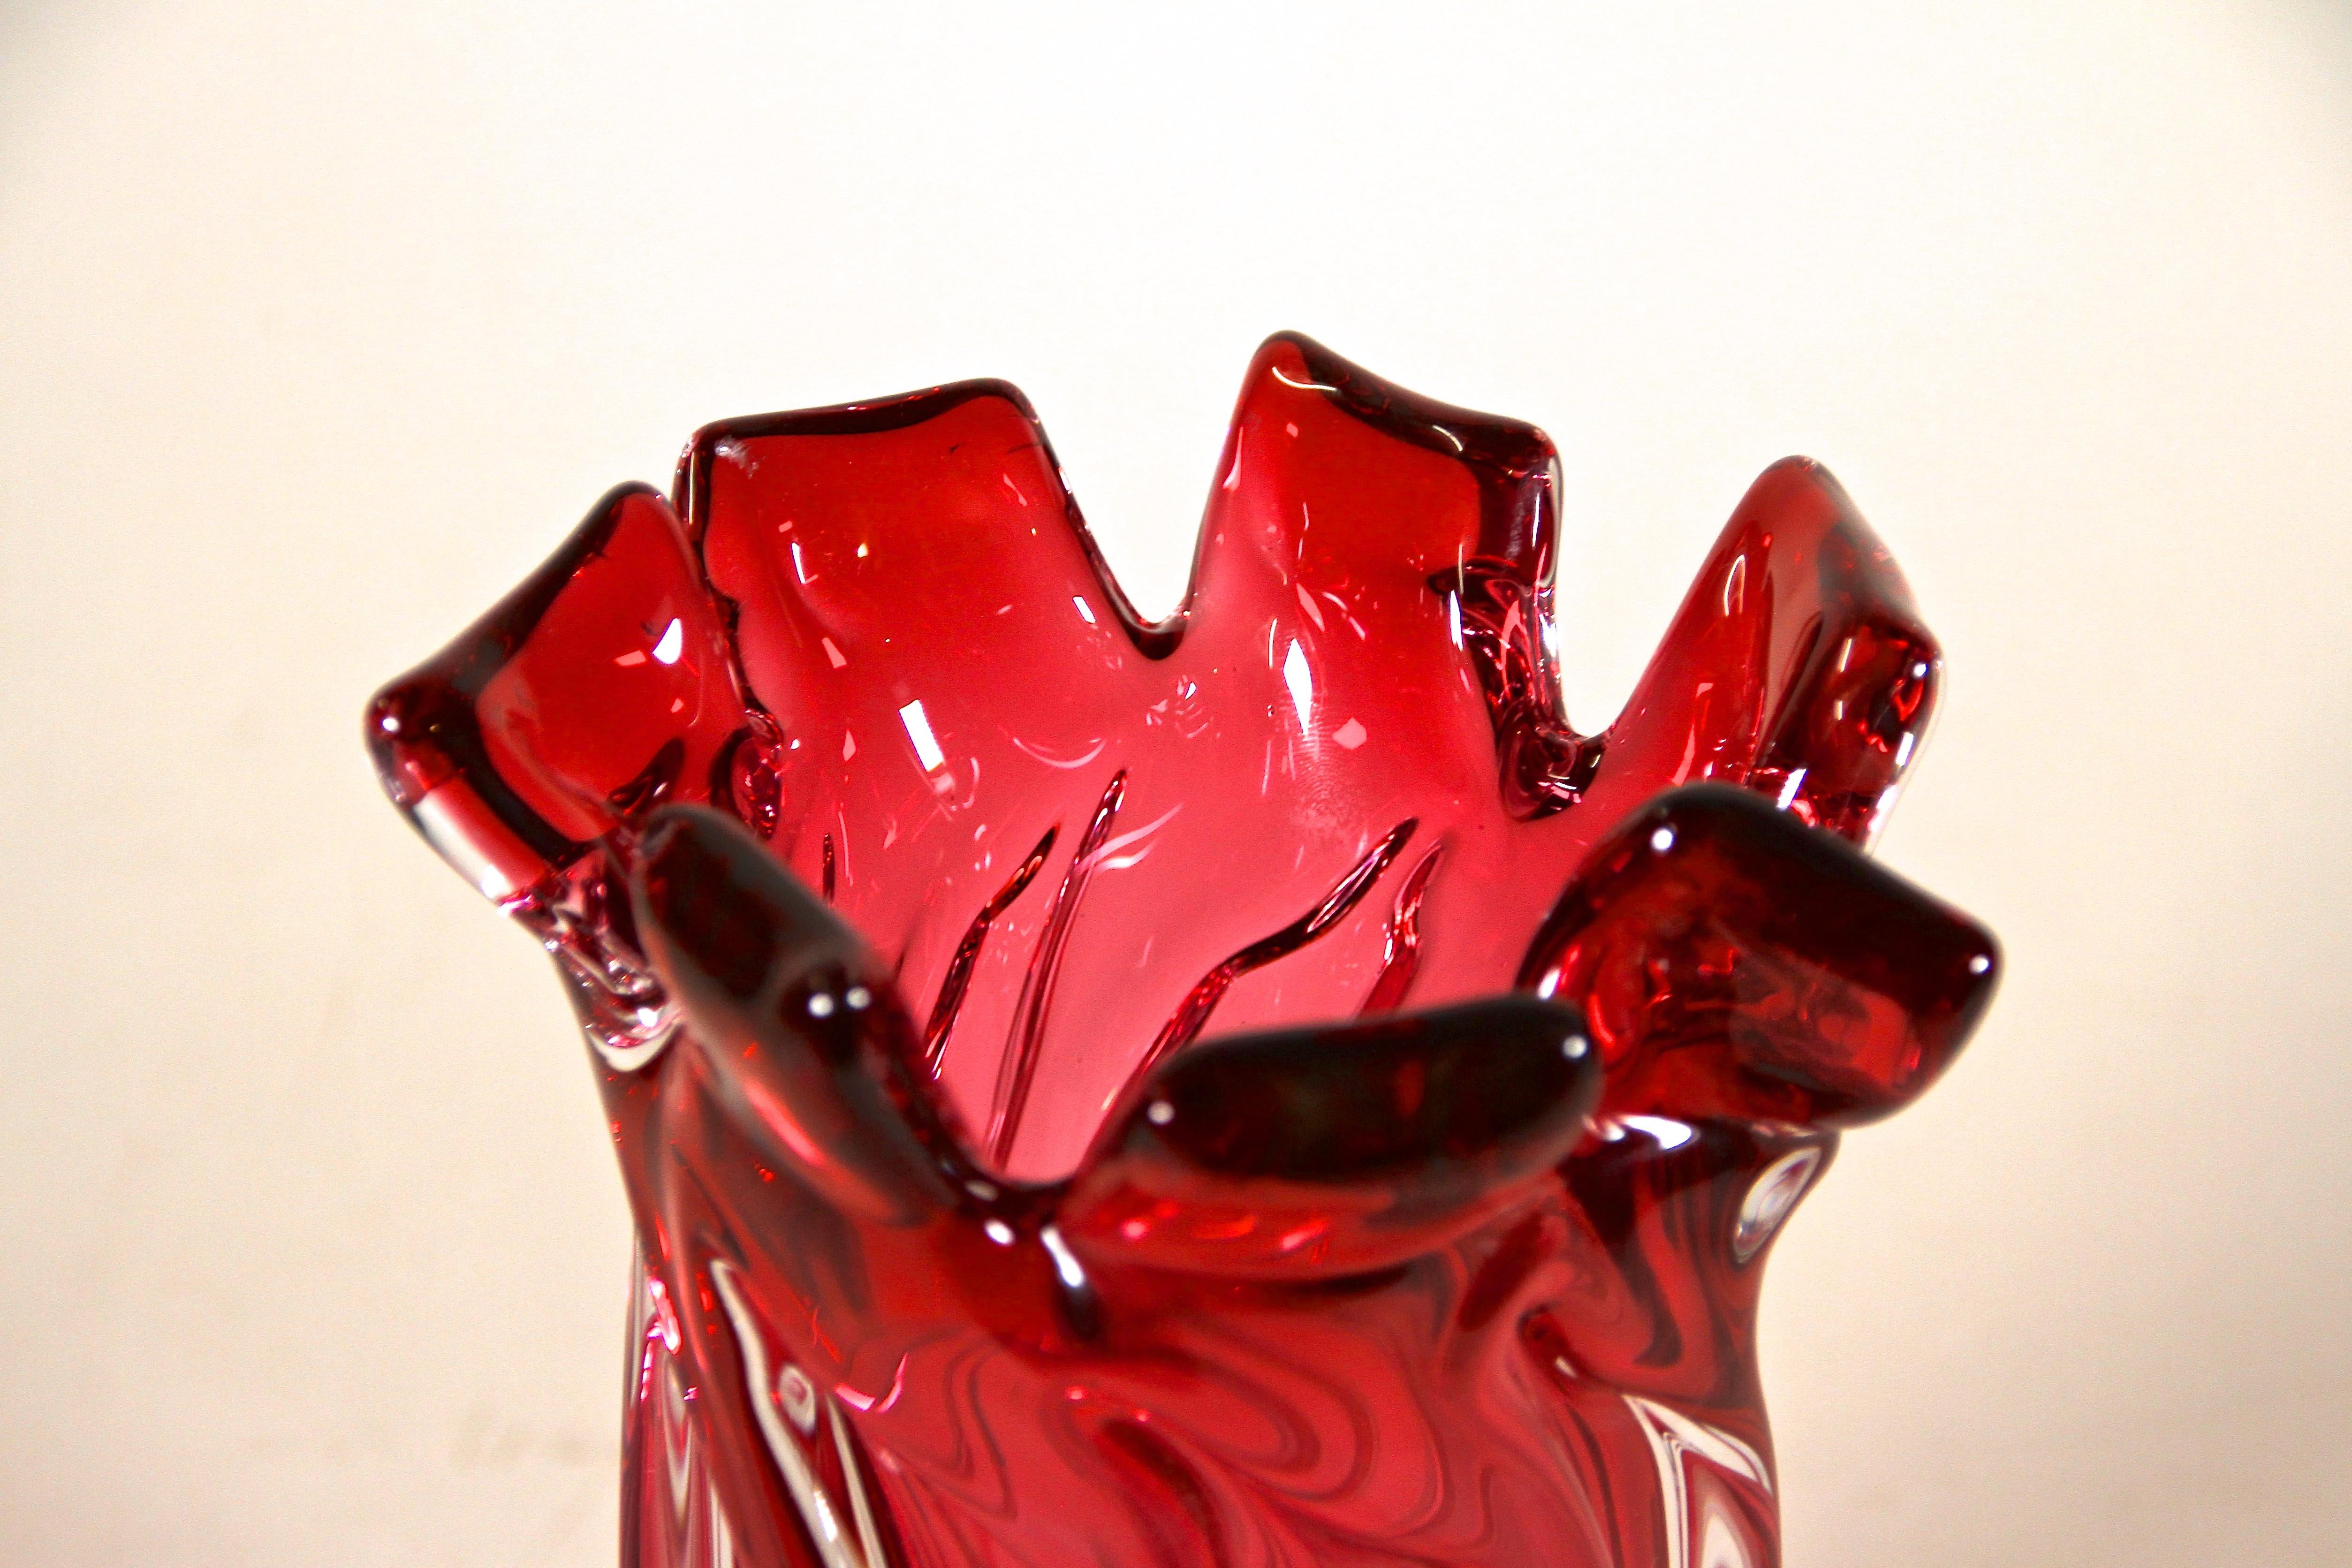 Delicate mid century Murano glass vase from the renown glass art workshops in Italy. Artfully made in the period around 1960 this fantastic shaped glass vase shows a lovely coloration in a beautiful pink red tone. The twisted body looks gorgeous and